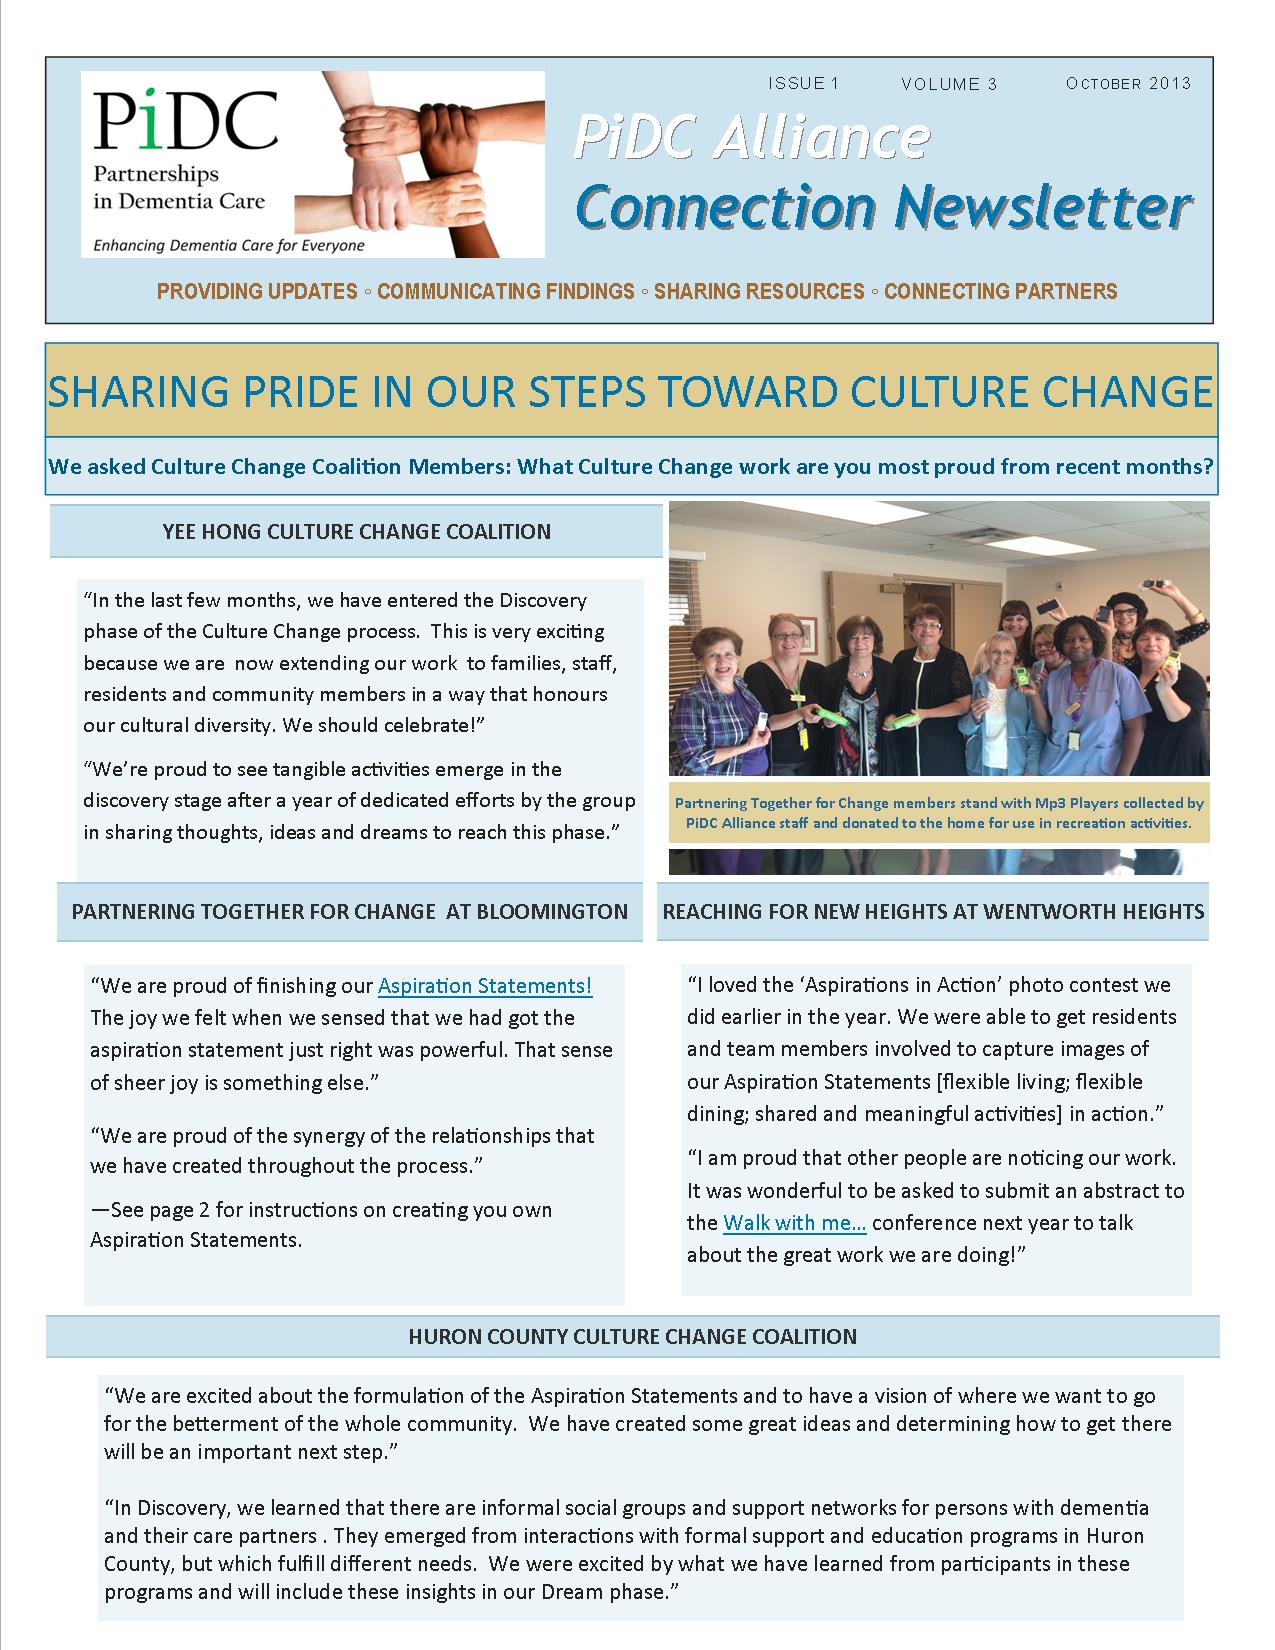 First page print version of newsletter